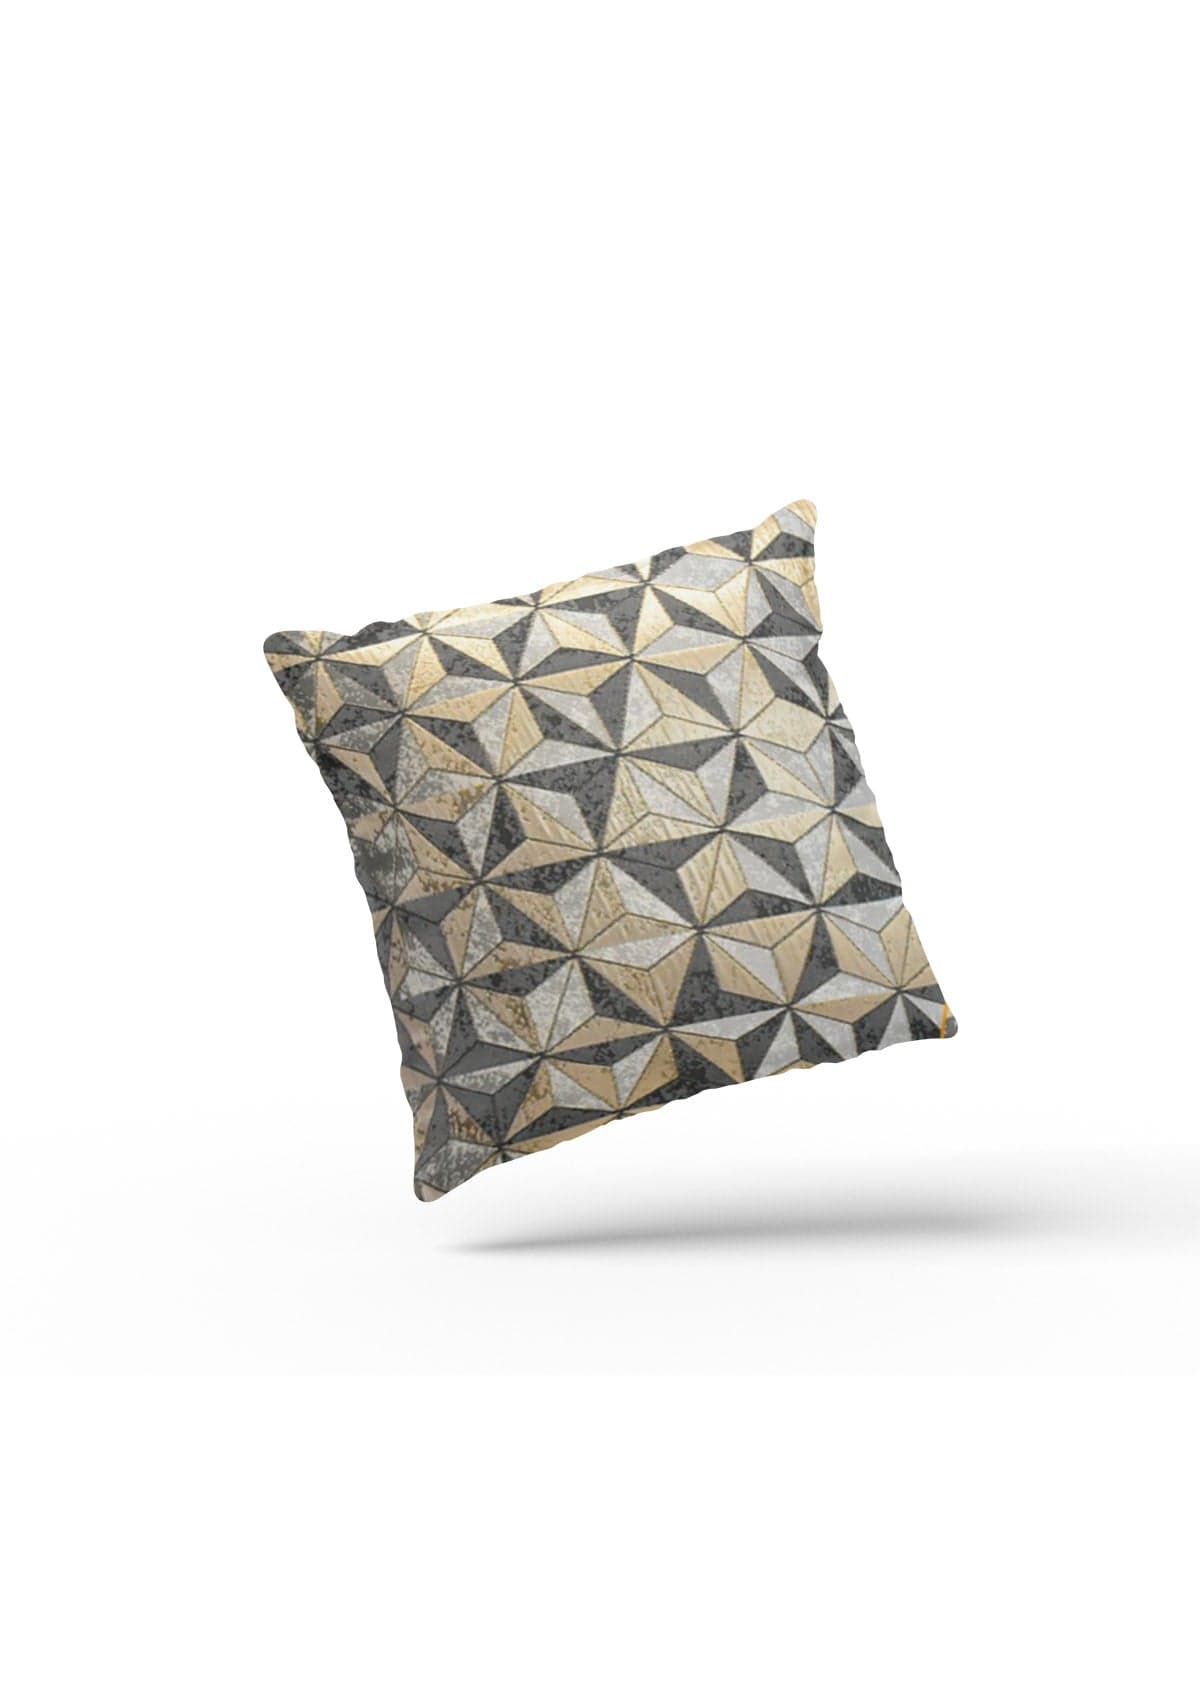 Black and Gold Geometric Cushion Covers | CovermyCushion